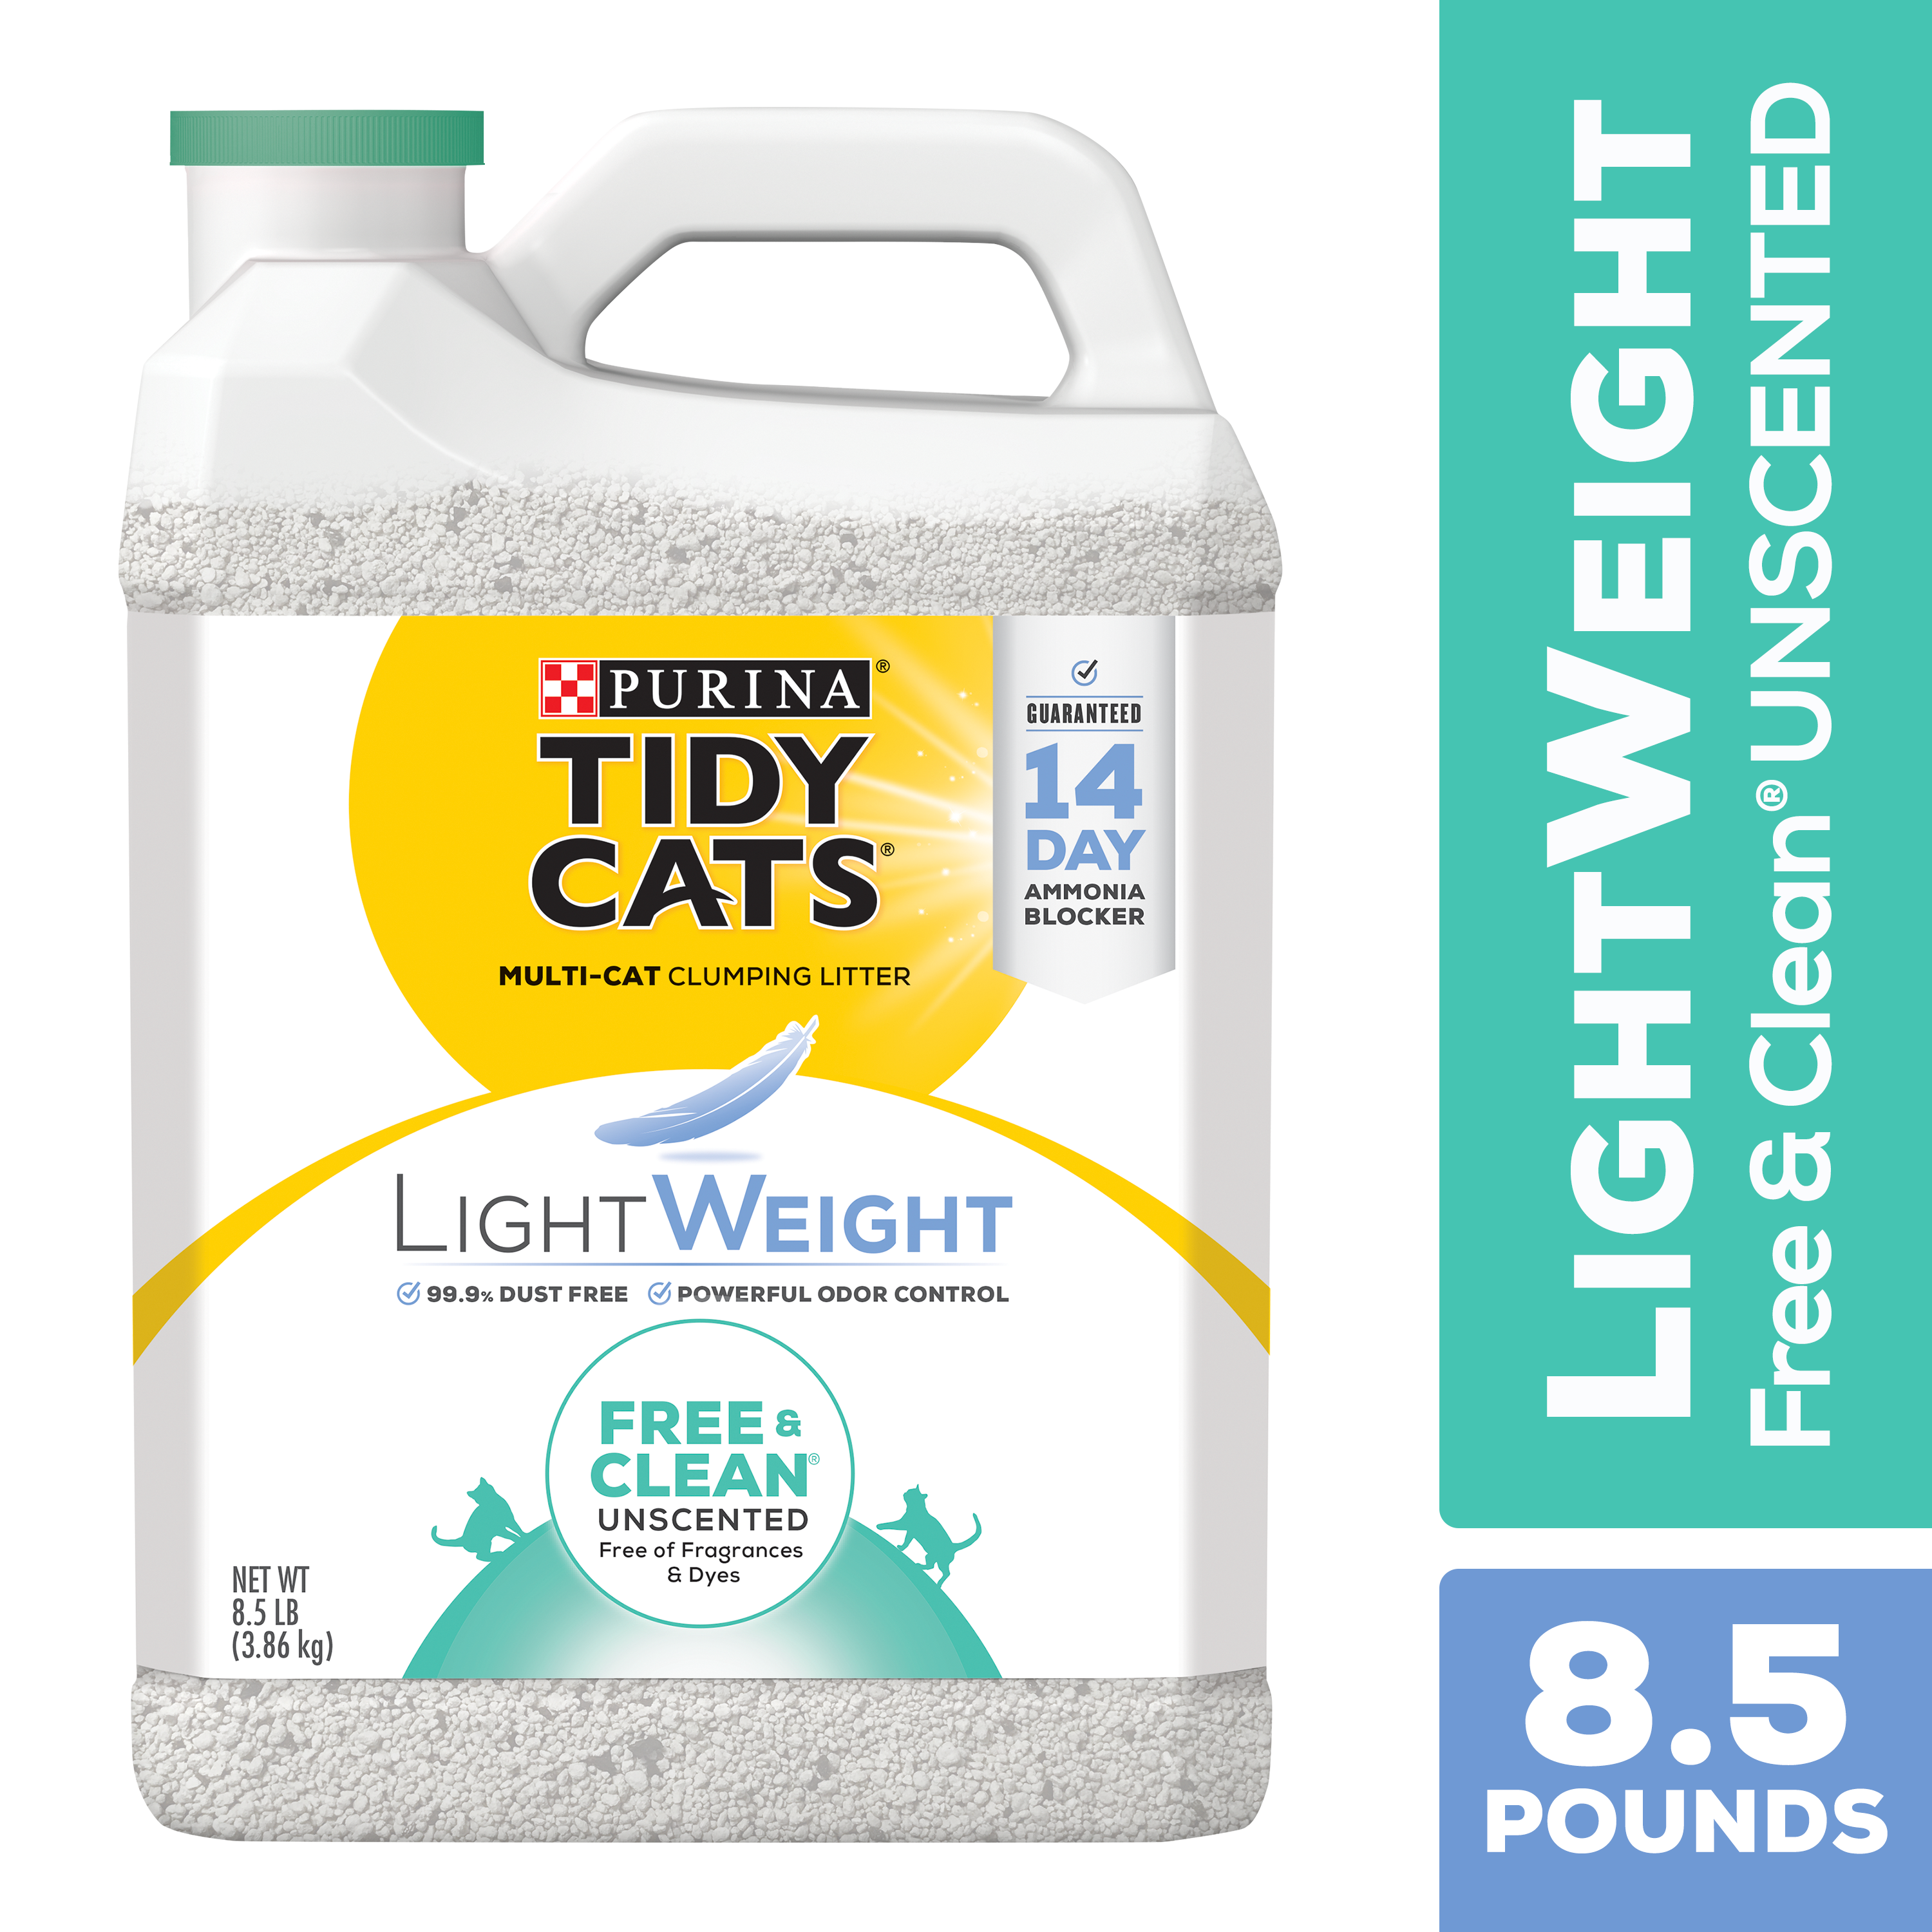 Purina Tidy Cats Low Dust, Clumping Cat Litter, LightWeight Free ...